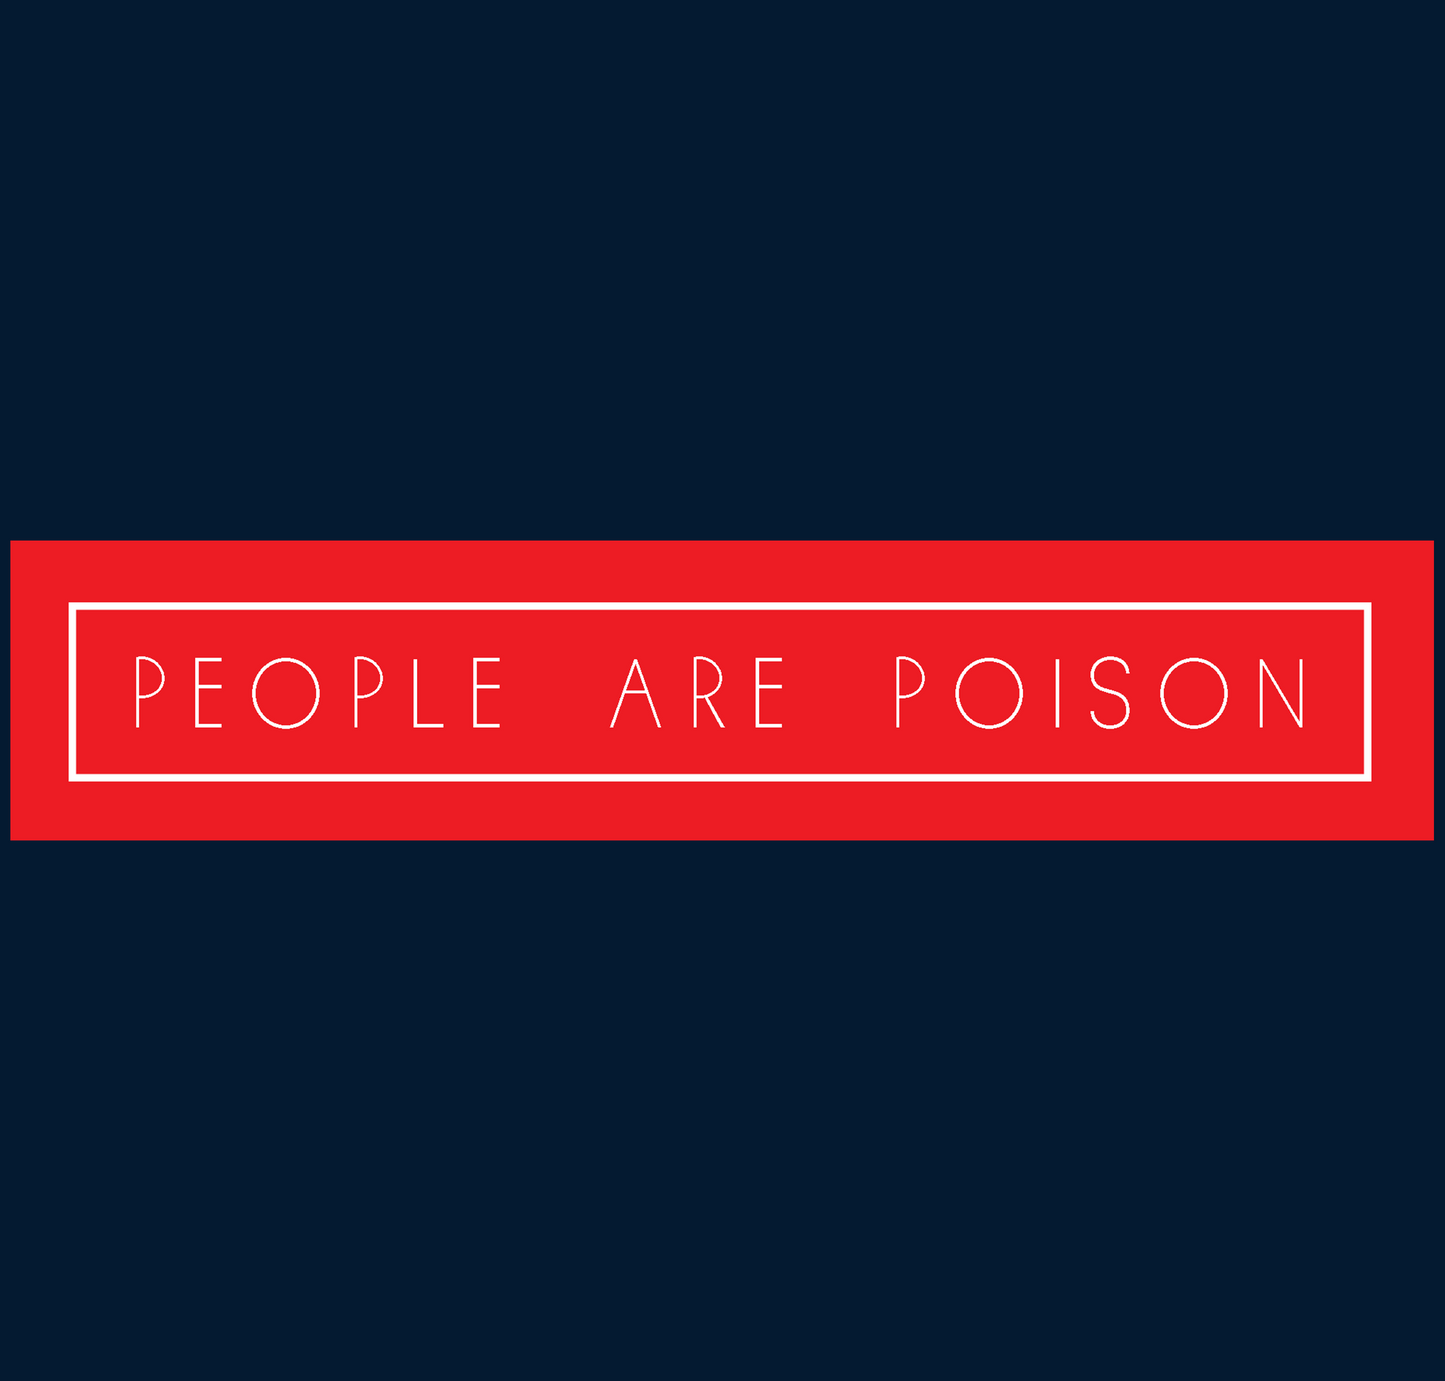 "PEOPLE ARE POISON" - HALF-SLEEVE T-SHIRT'S